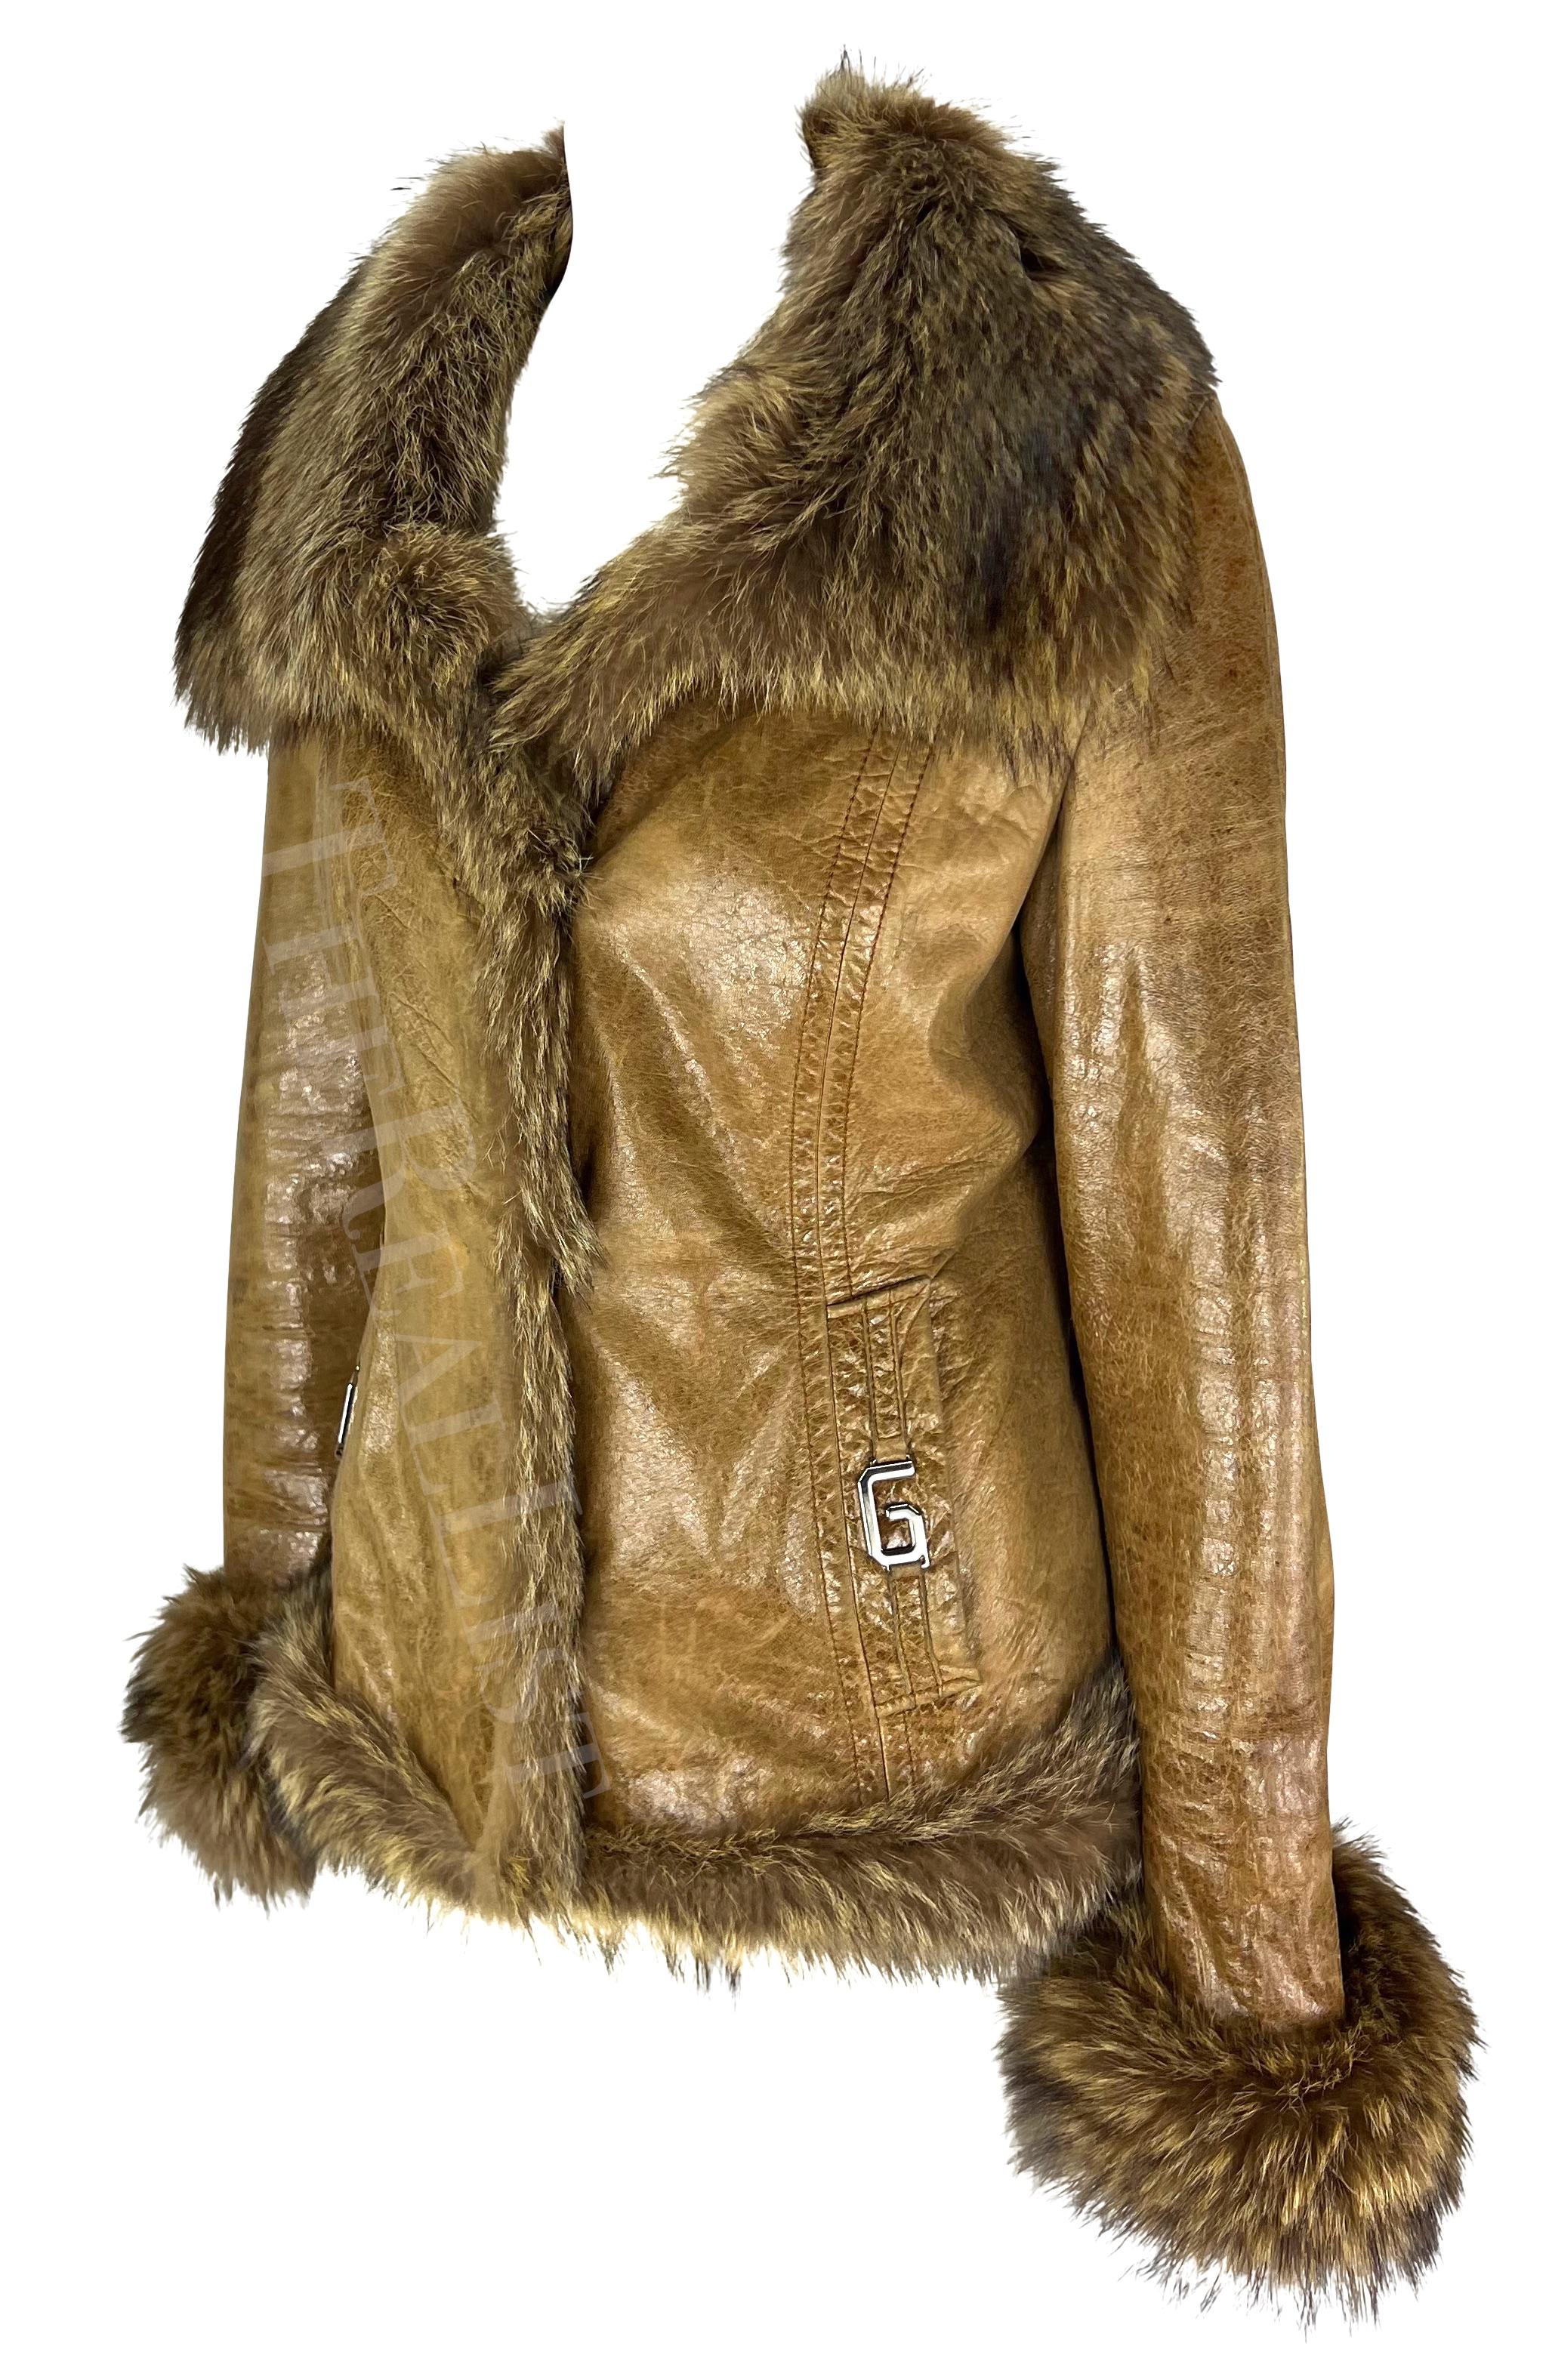 Presenting a fabulous brown Dolce & Gabbana leather coat. From the 2000s, this chic coat is constructed of lightly distressed shiny leather and is made complete with fur trim at the collar, hem, and cuffs. Accented with a silver-tone 'D' and 'G' at